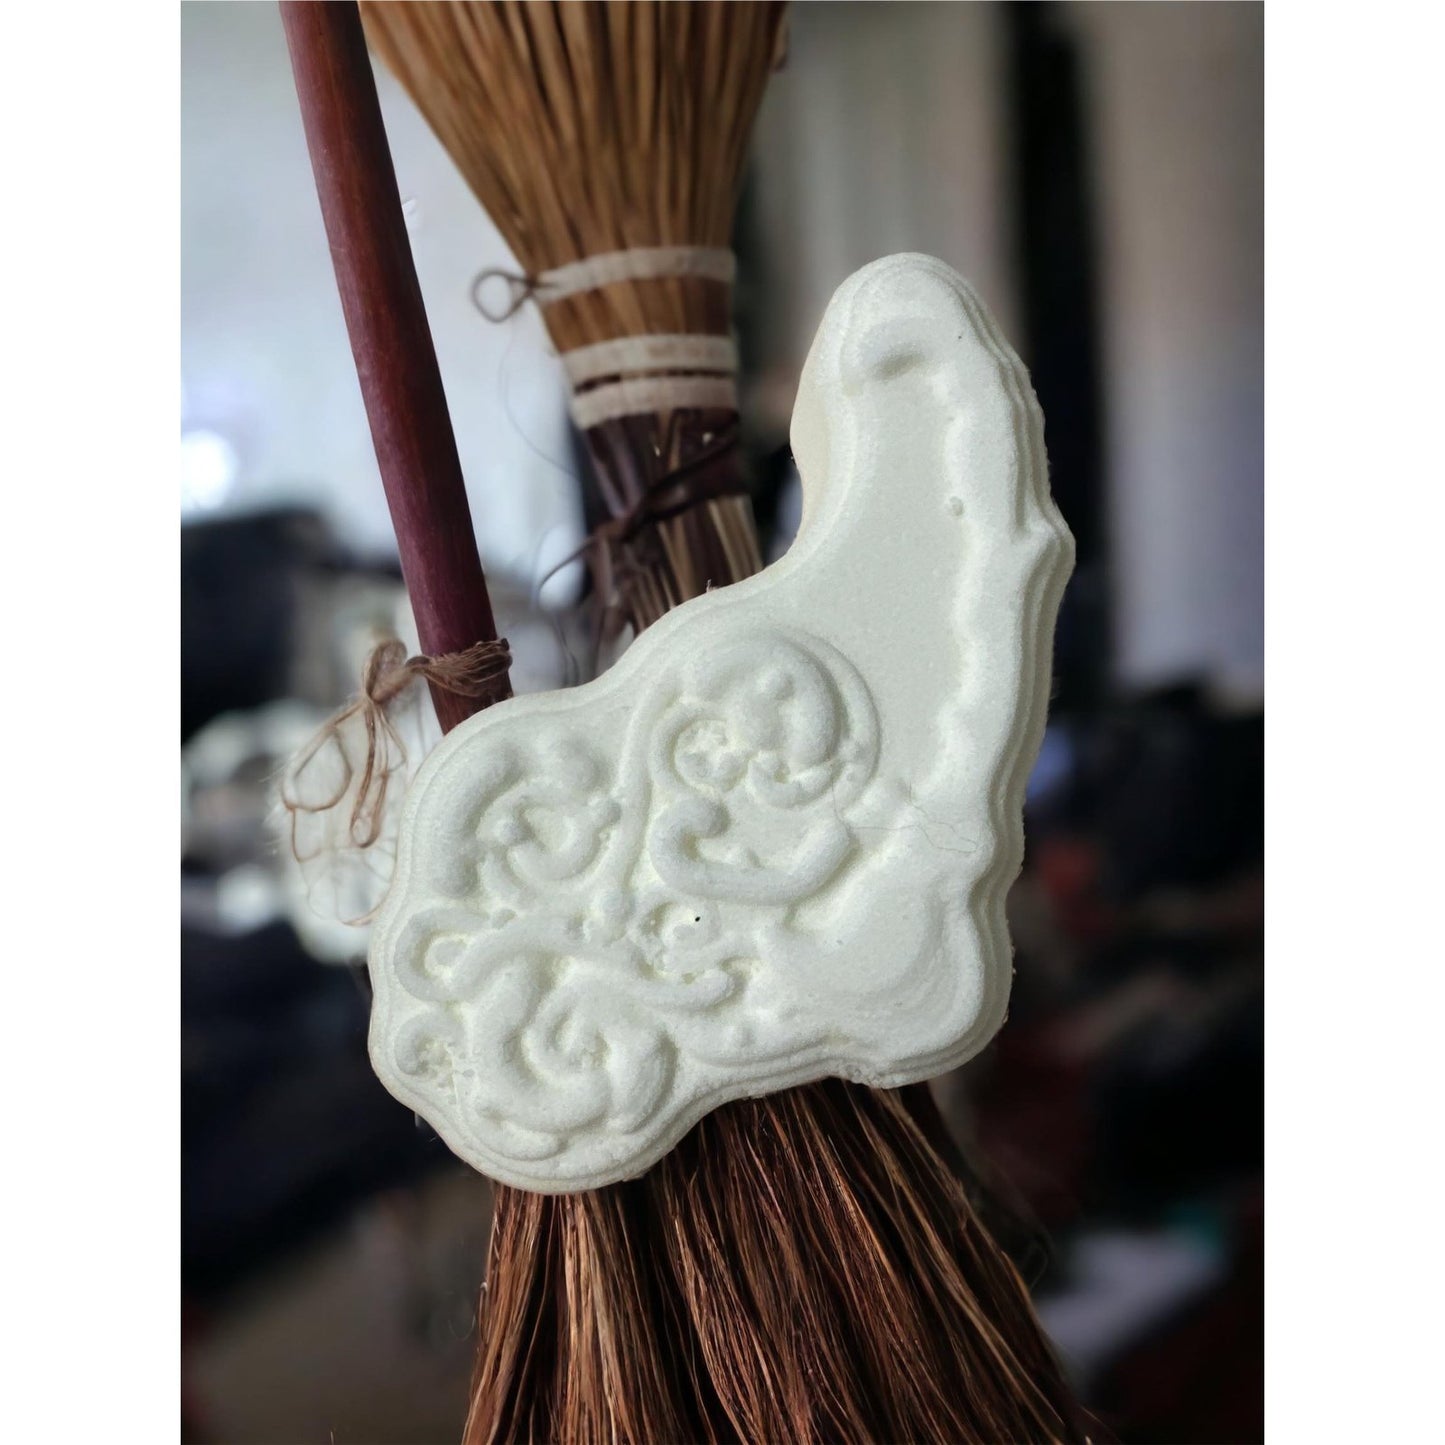 Magical Witches Broom Hybrid Mold